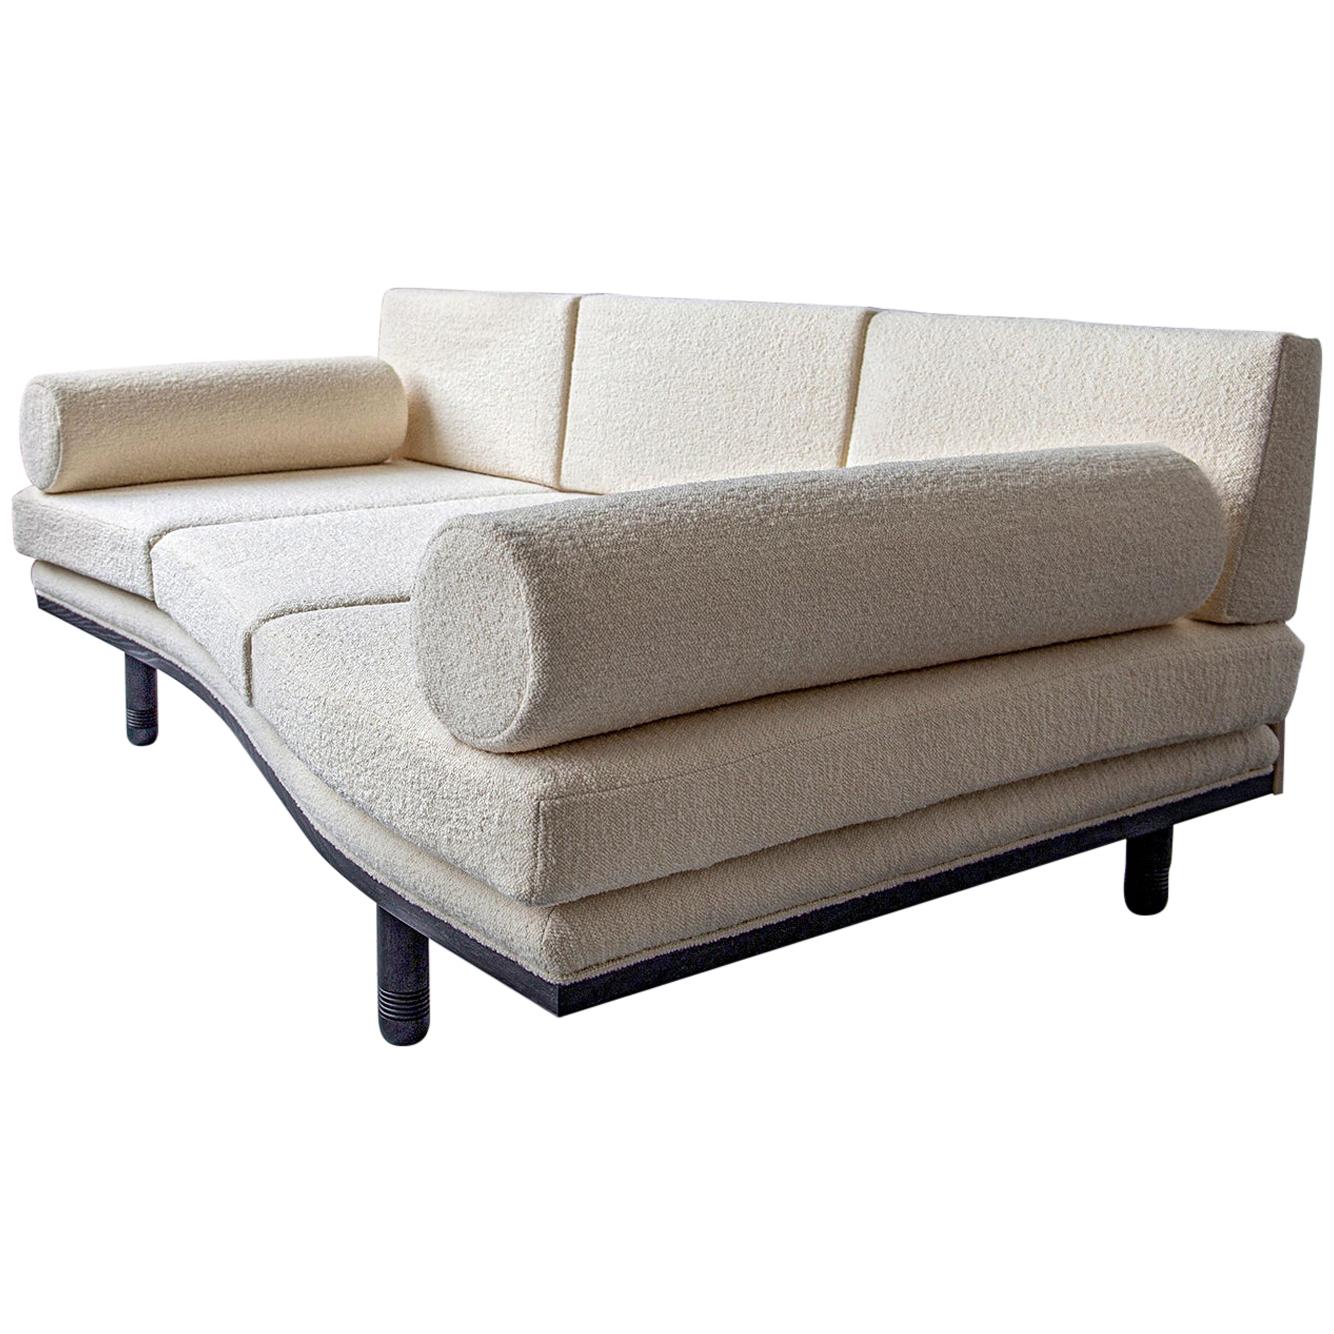 Baalbek, Trapezoidal Sofa Daybed by Toad Gallery, Contemporary Edition 2020